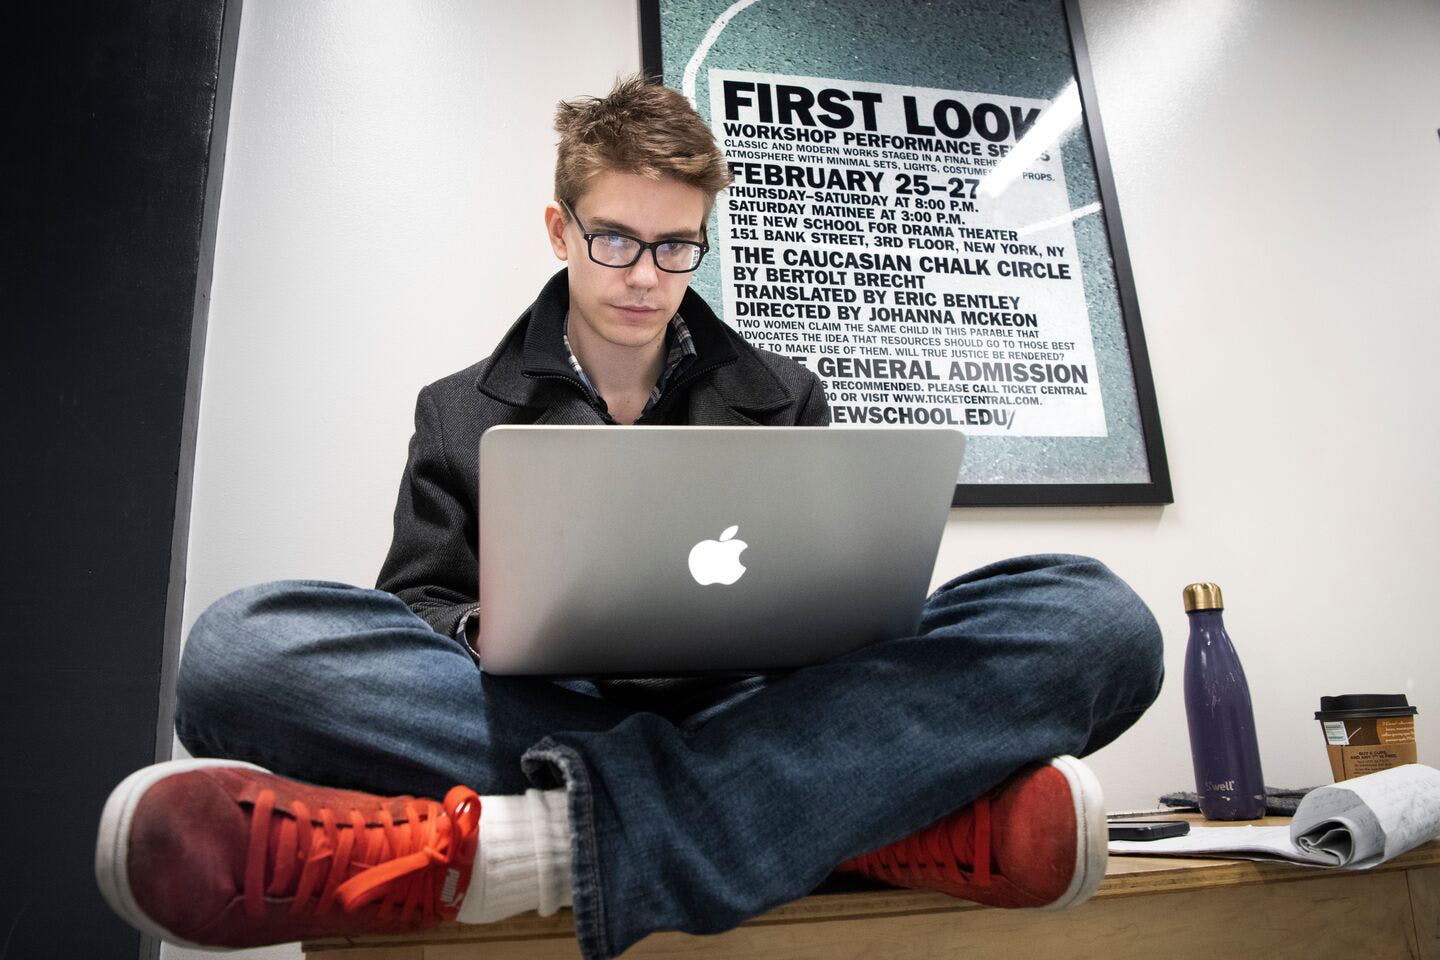 A male student types on a laotop computer.